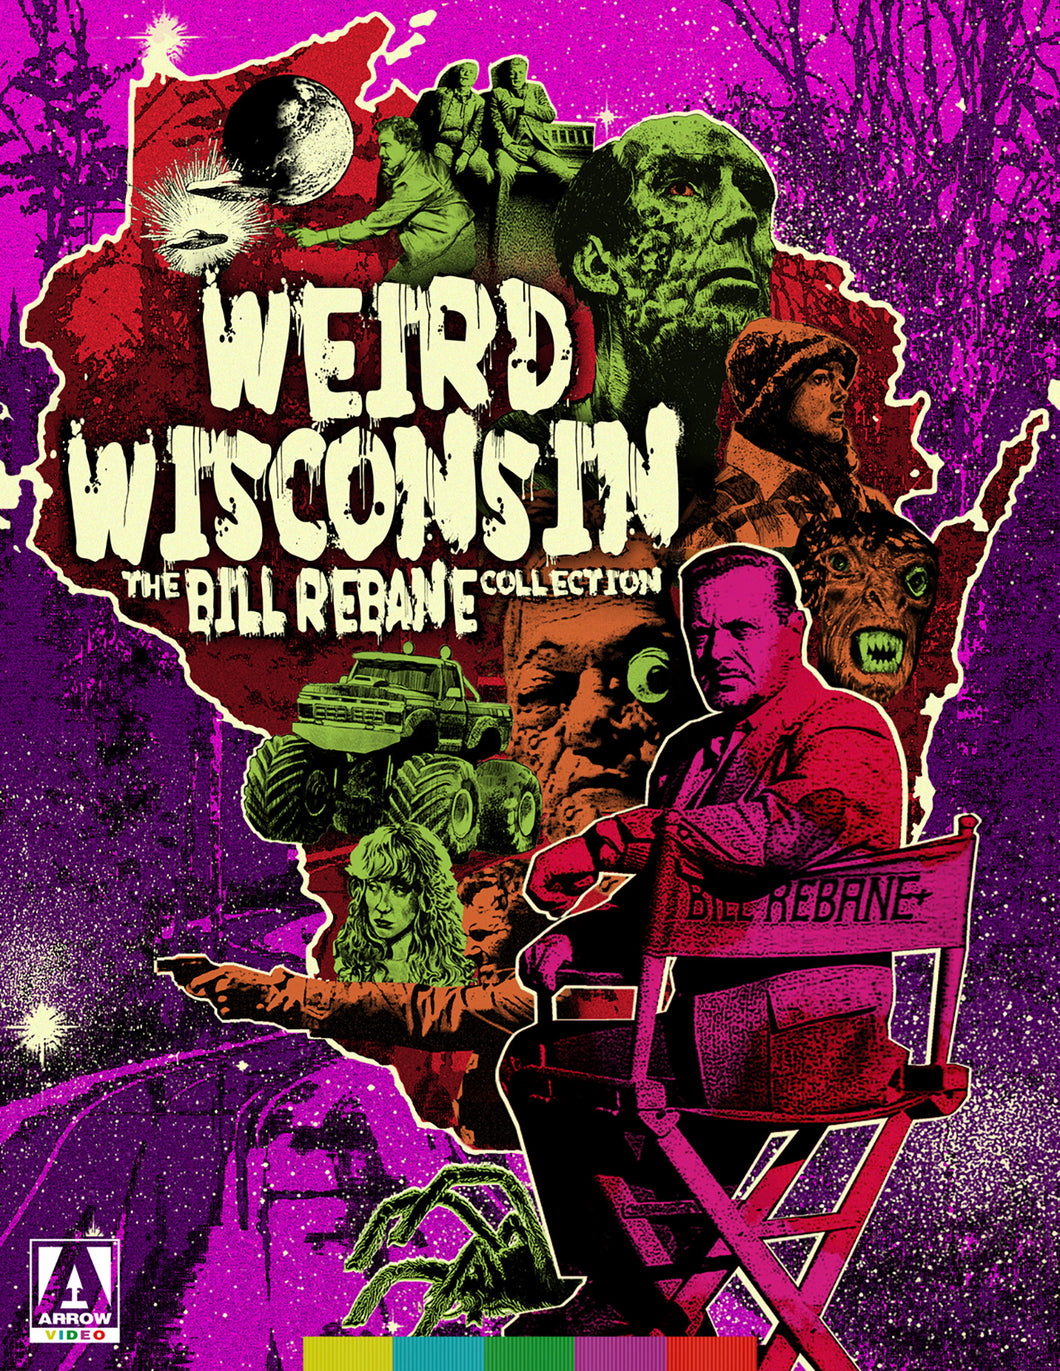 Weird Wisconsin: The Bill Rebane Collection [Limited Edition] (Blu-ray)